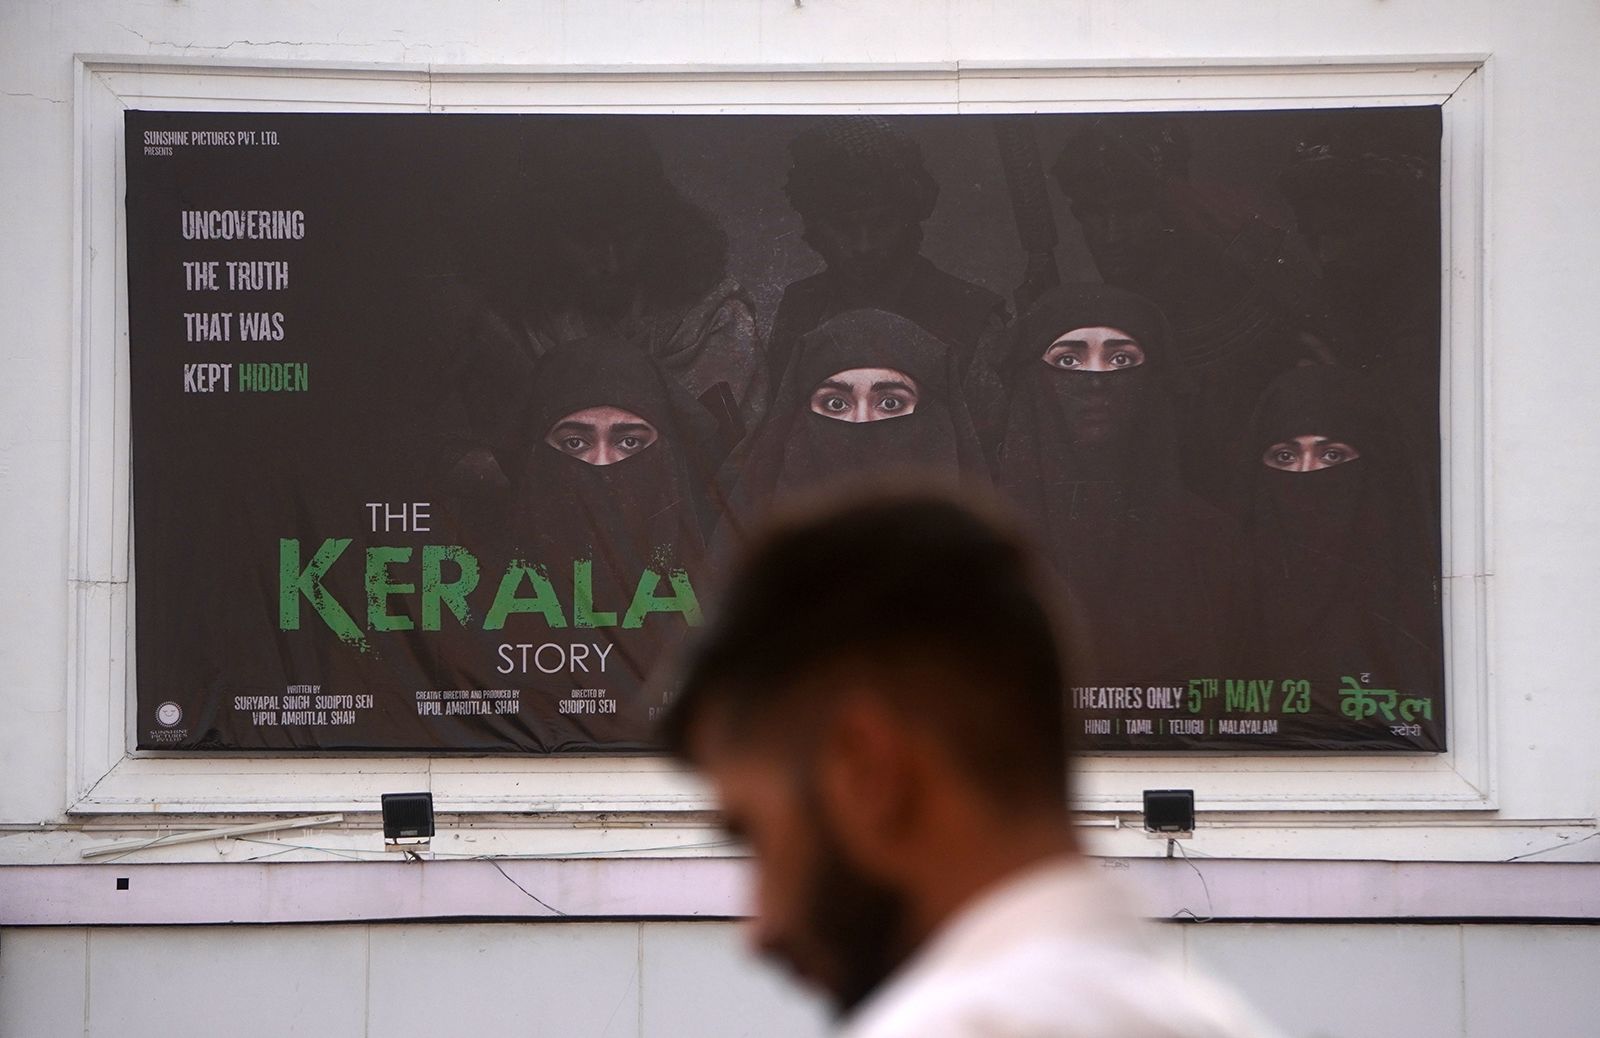 Xxx Kerala Enta Mother In Laws Videos - The Kerala Story' is a box office hit in India. It also vilifies Muslims,  critics say. | CNN